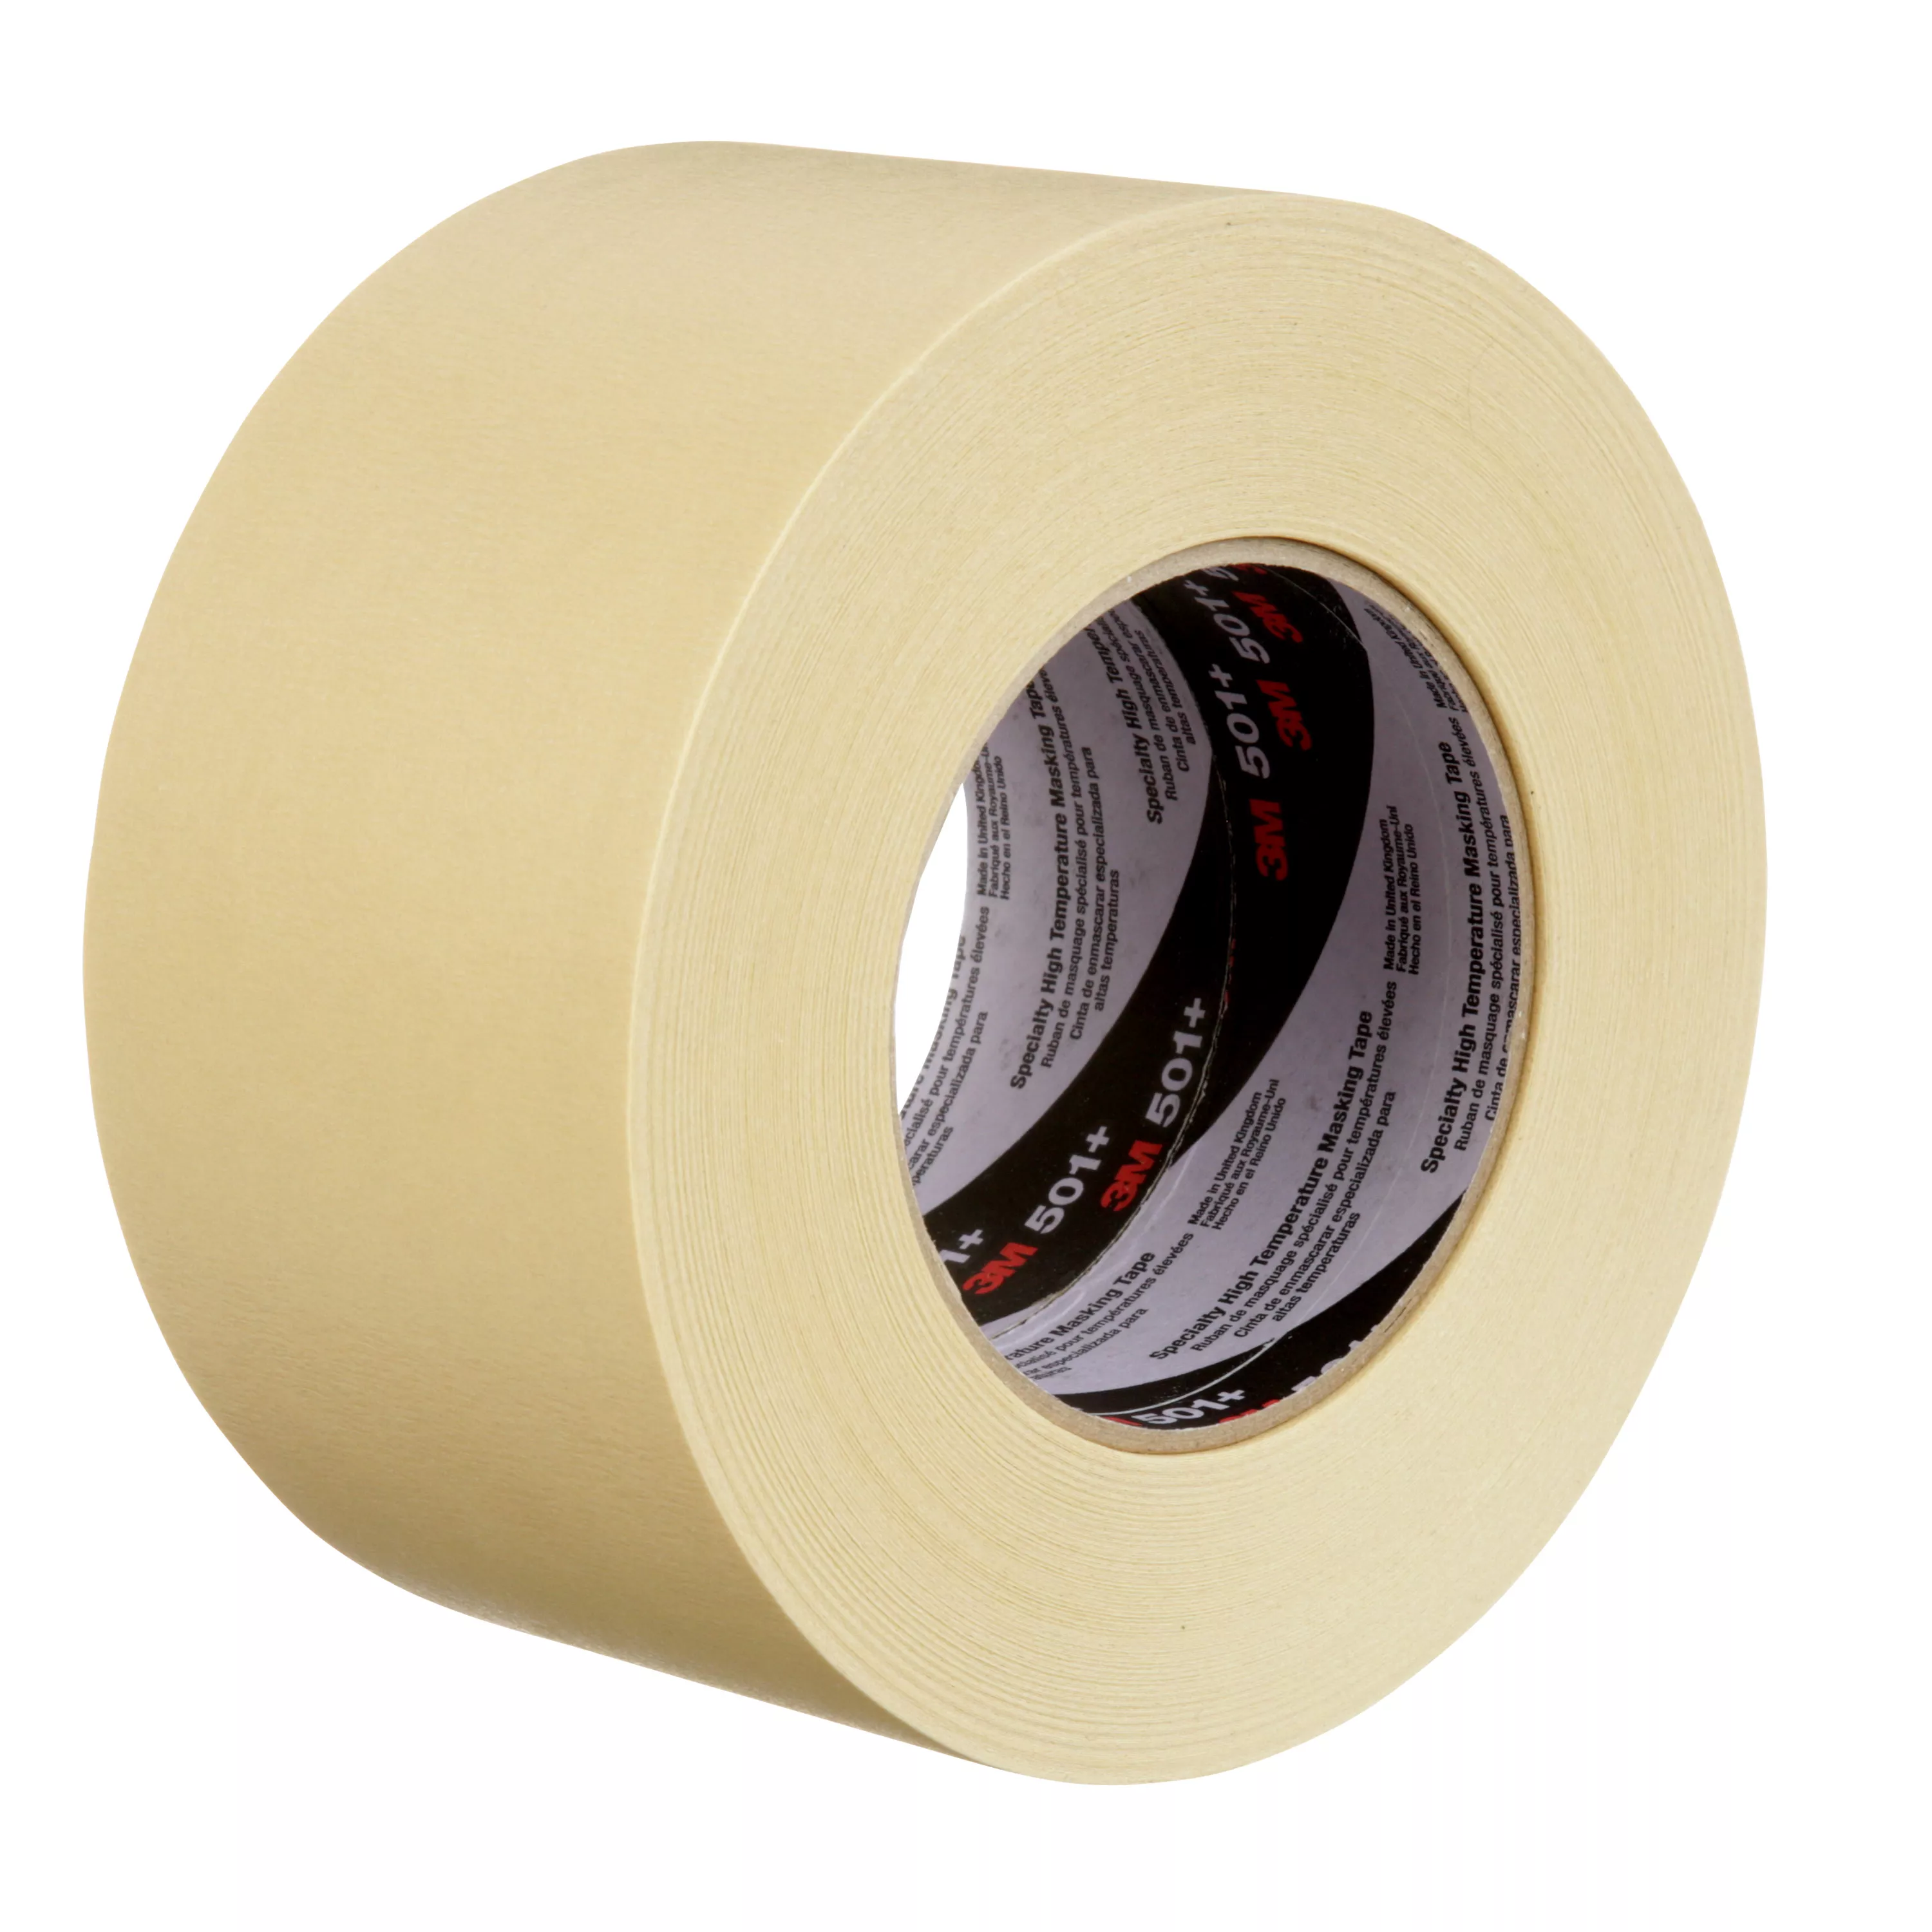 3M™ Specialty High Temperature Masking Tape 501+, Tan, 72 mm x 55 m, 7.3
mil, 12 Rolls/Case